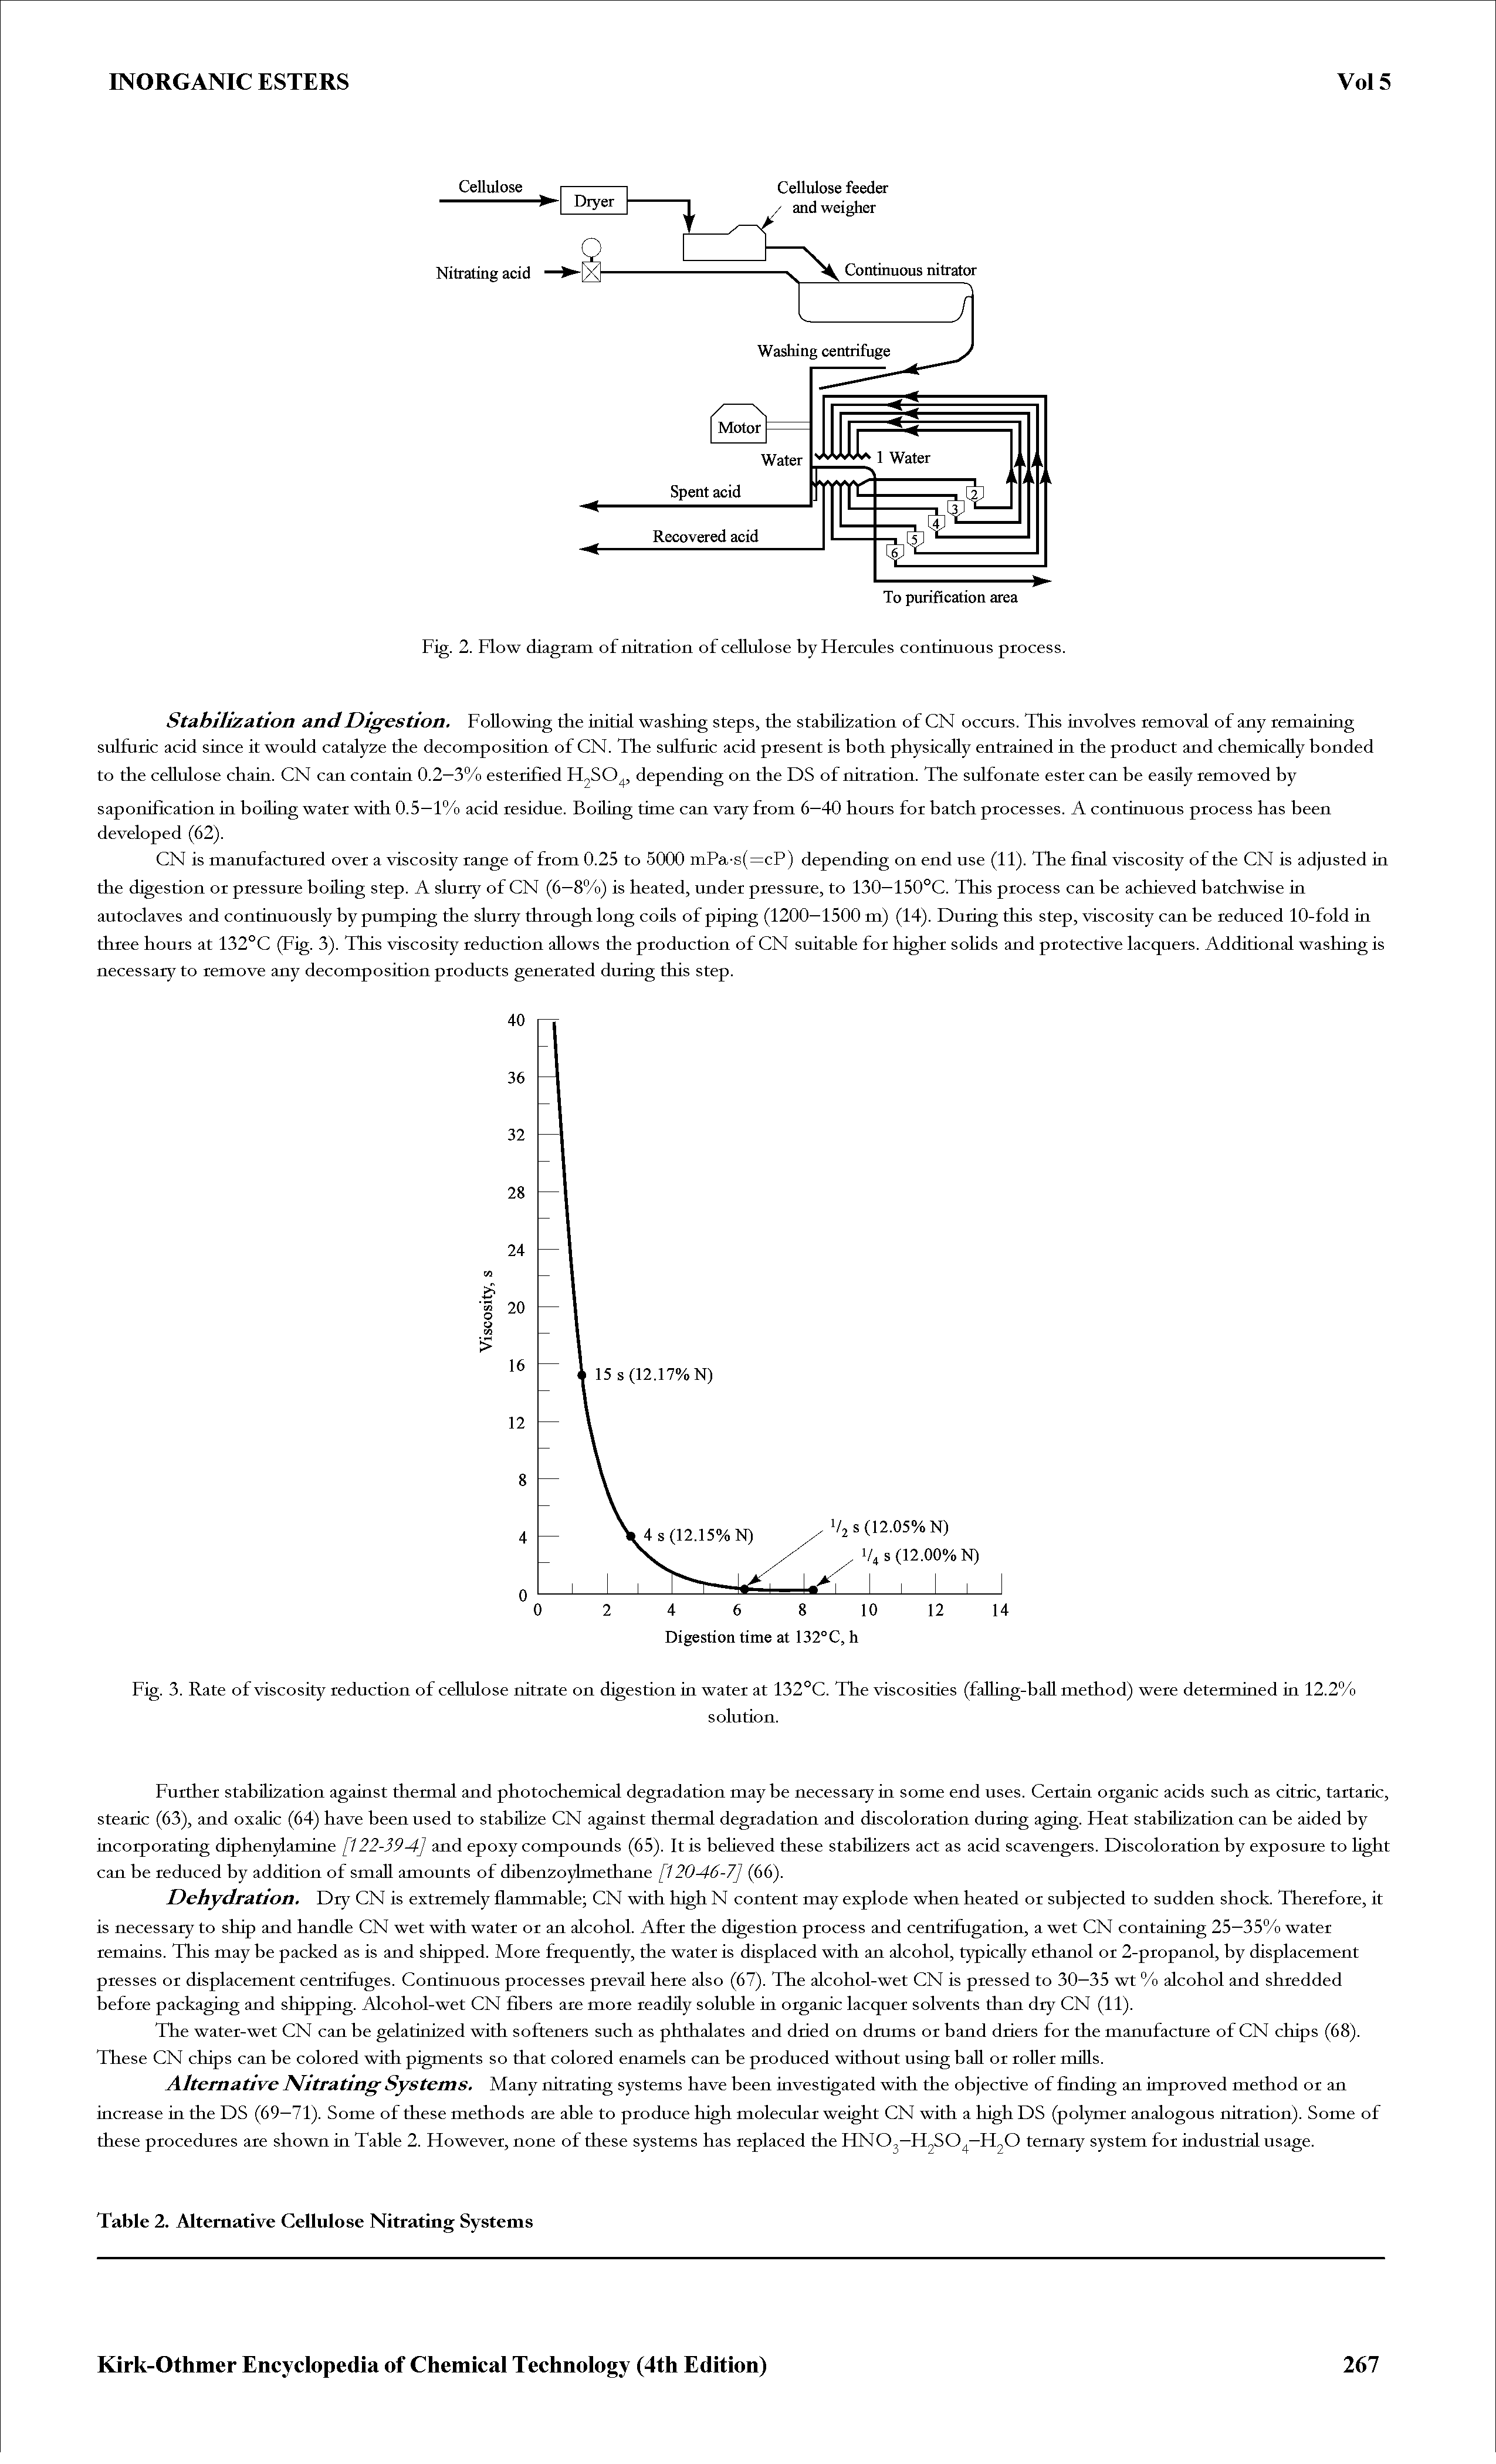 Fig. 2. Flow diagram of nitration of cellulose by Hercules continuous process.